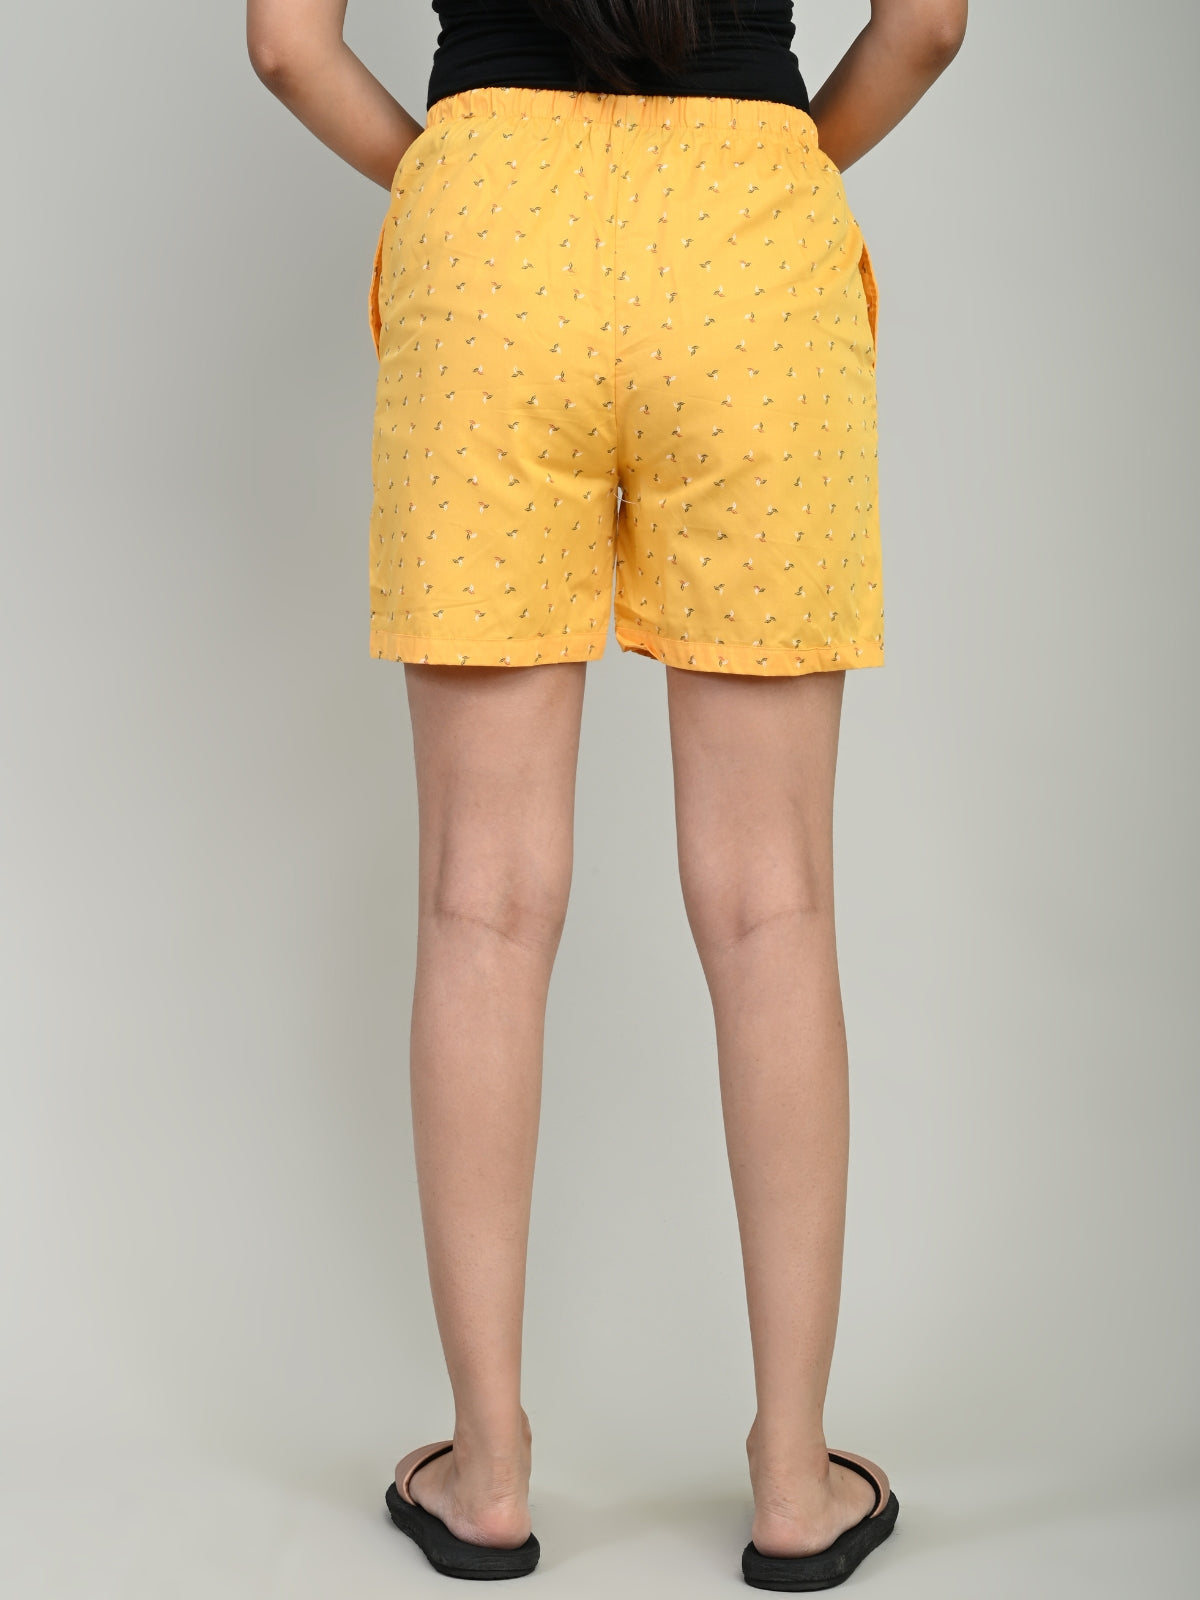 Pack Of 2 Womens White And Yellow Printed Short Combo